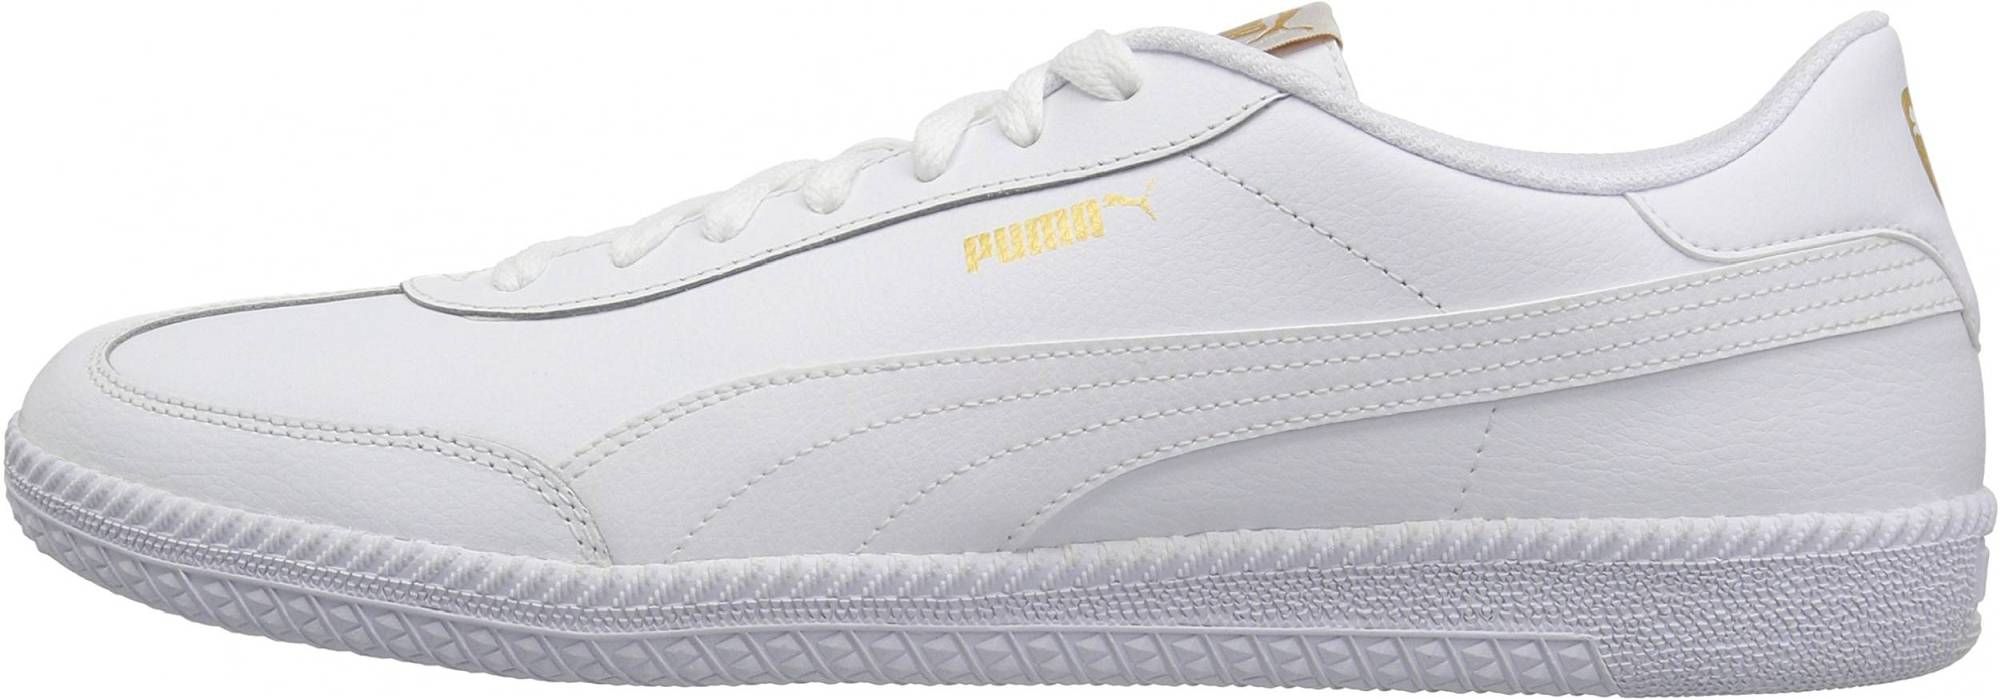 puma astro cup review